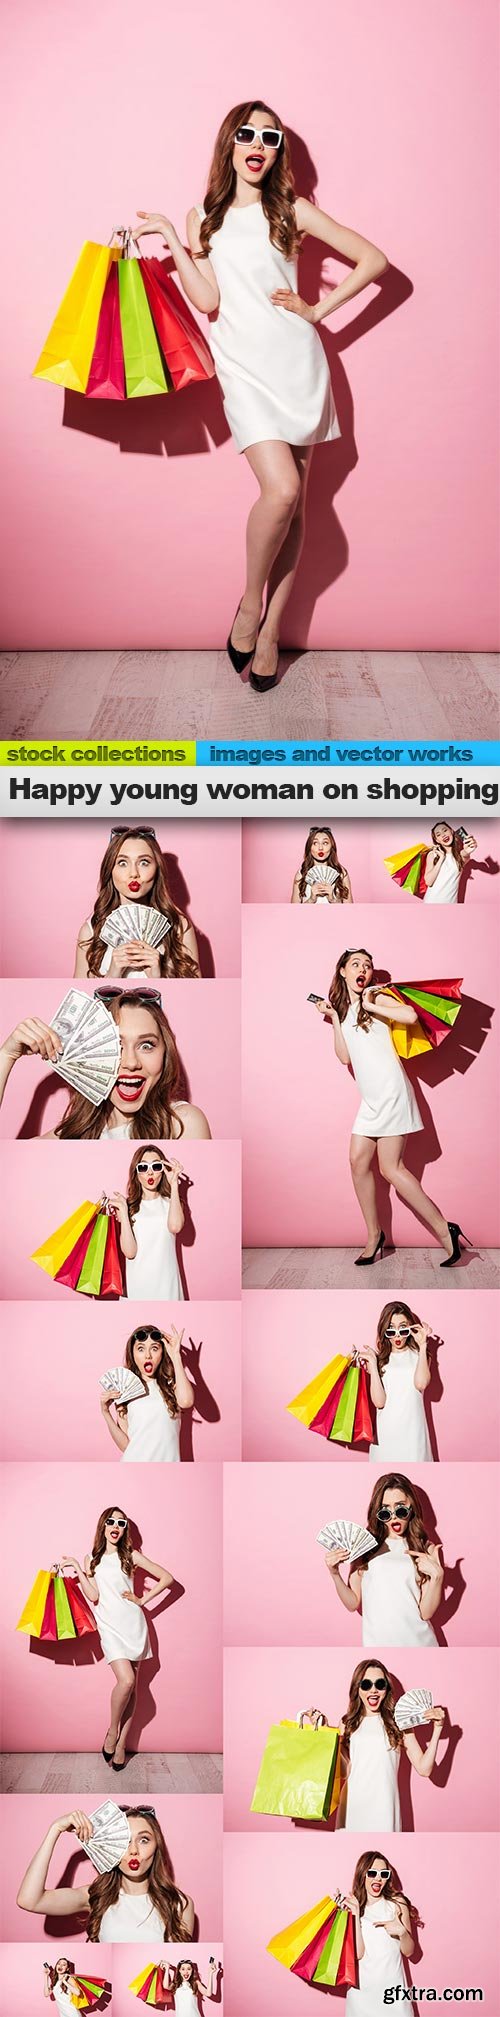 Happy young woman on shopping, 15 x UHQ JPEG